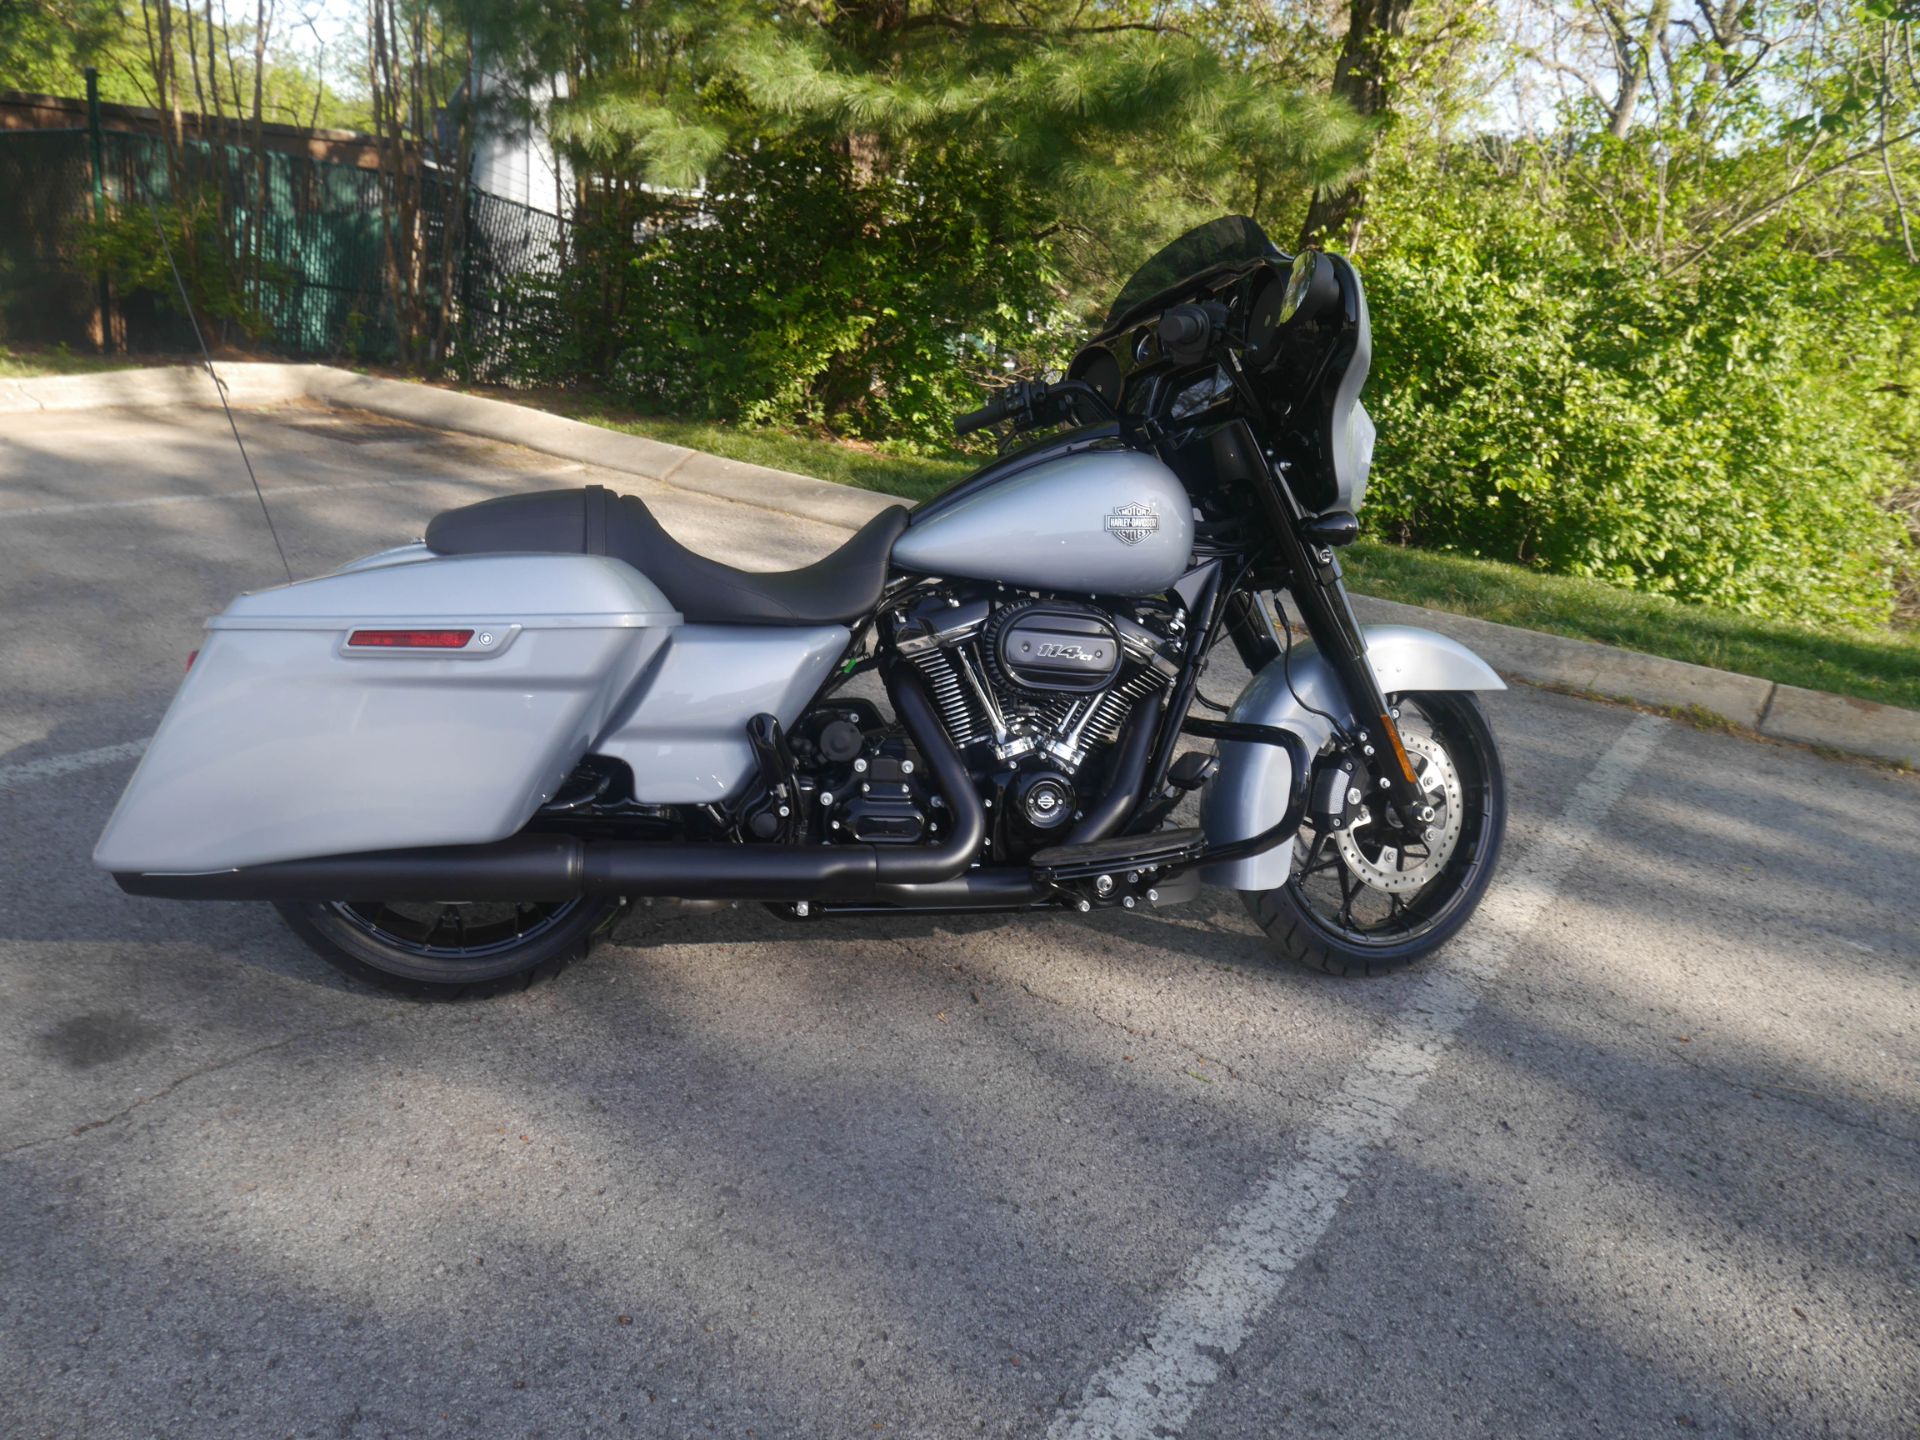 2023 Harley-Davidson Street Glide® Special in Franklin, Tennessee - Photo 10